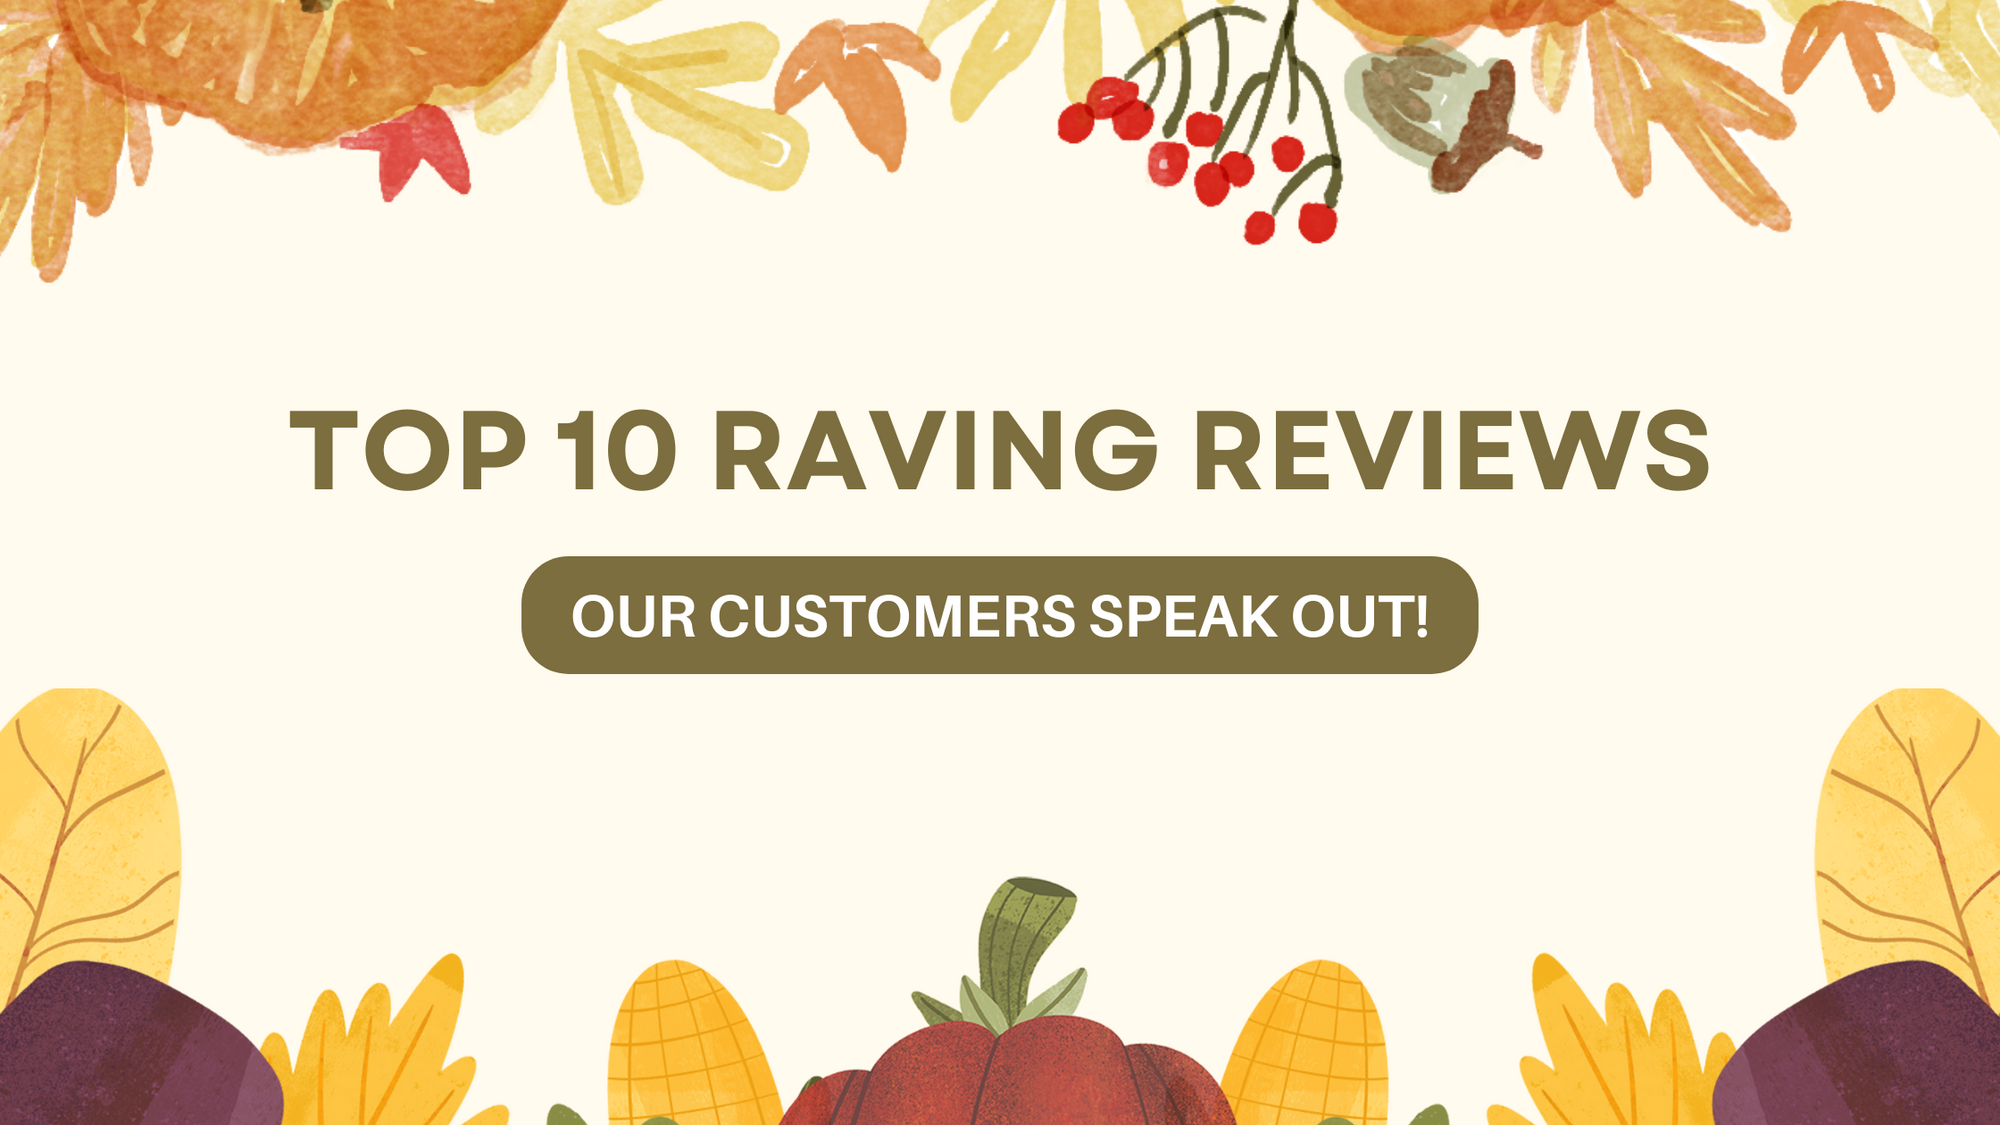 Top 10 Raving Reviews: Our Customers Speak Out! - October 8th